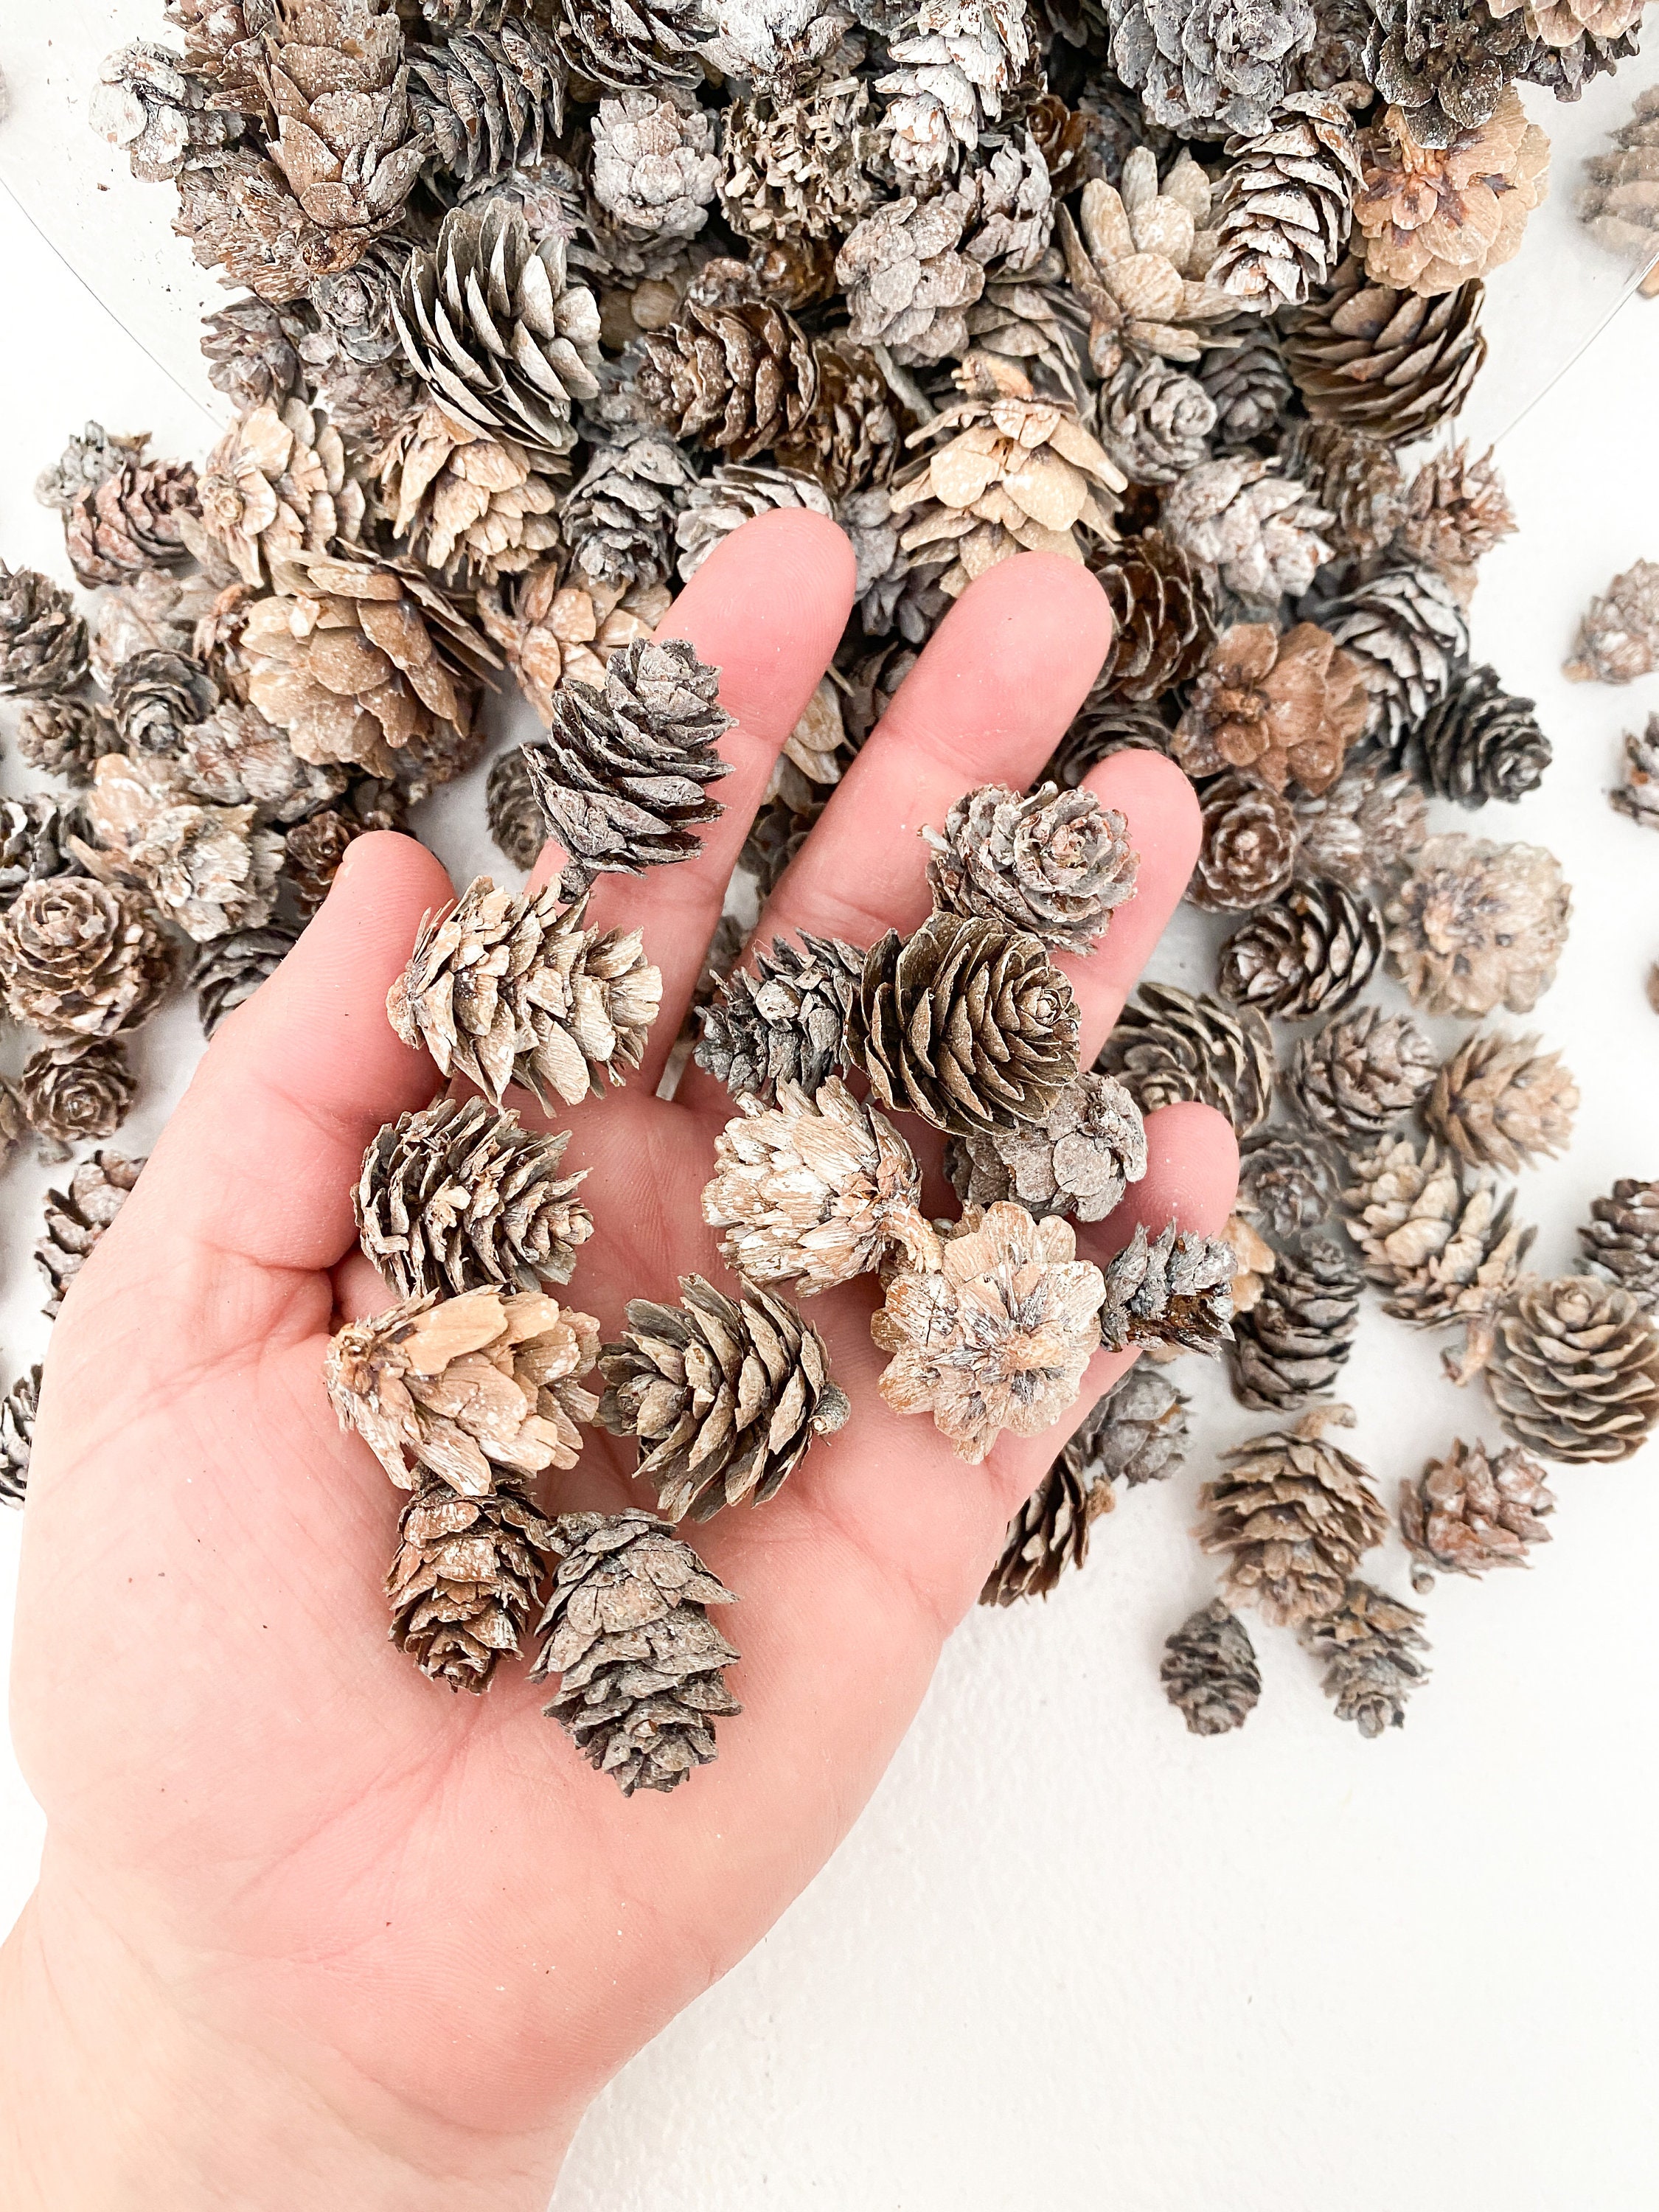 50 Small Slightly White Washed Pinecones Holiday, Pine Tree Cones ITEM  01168 